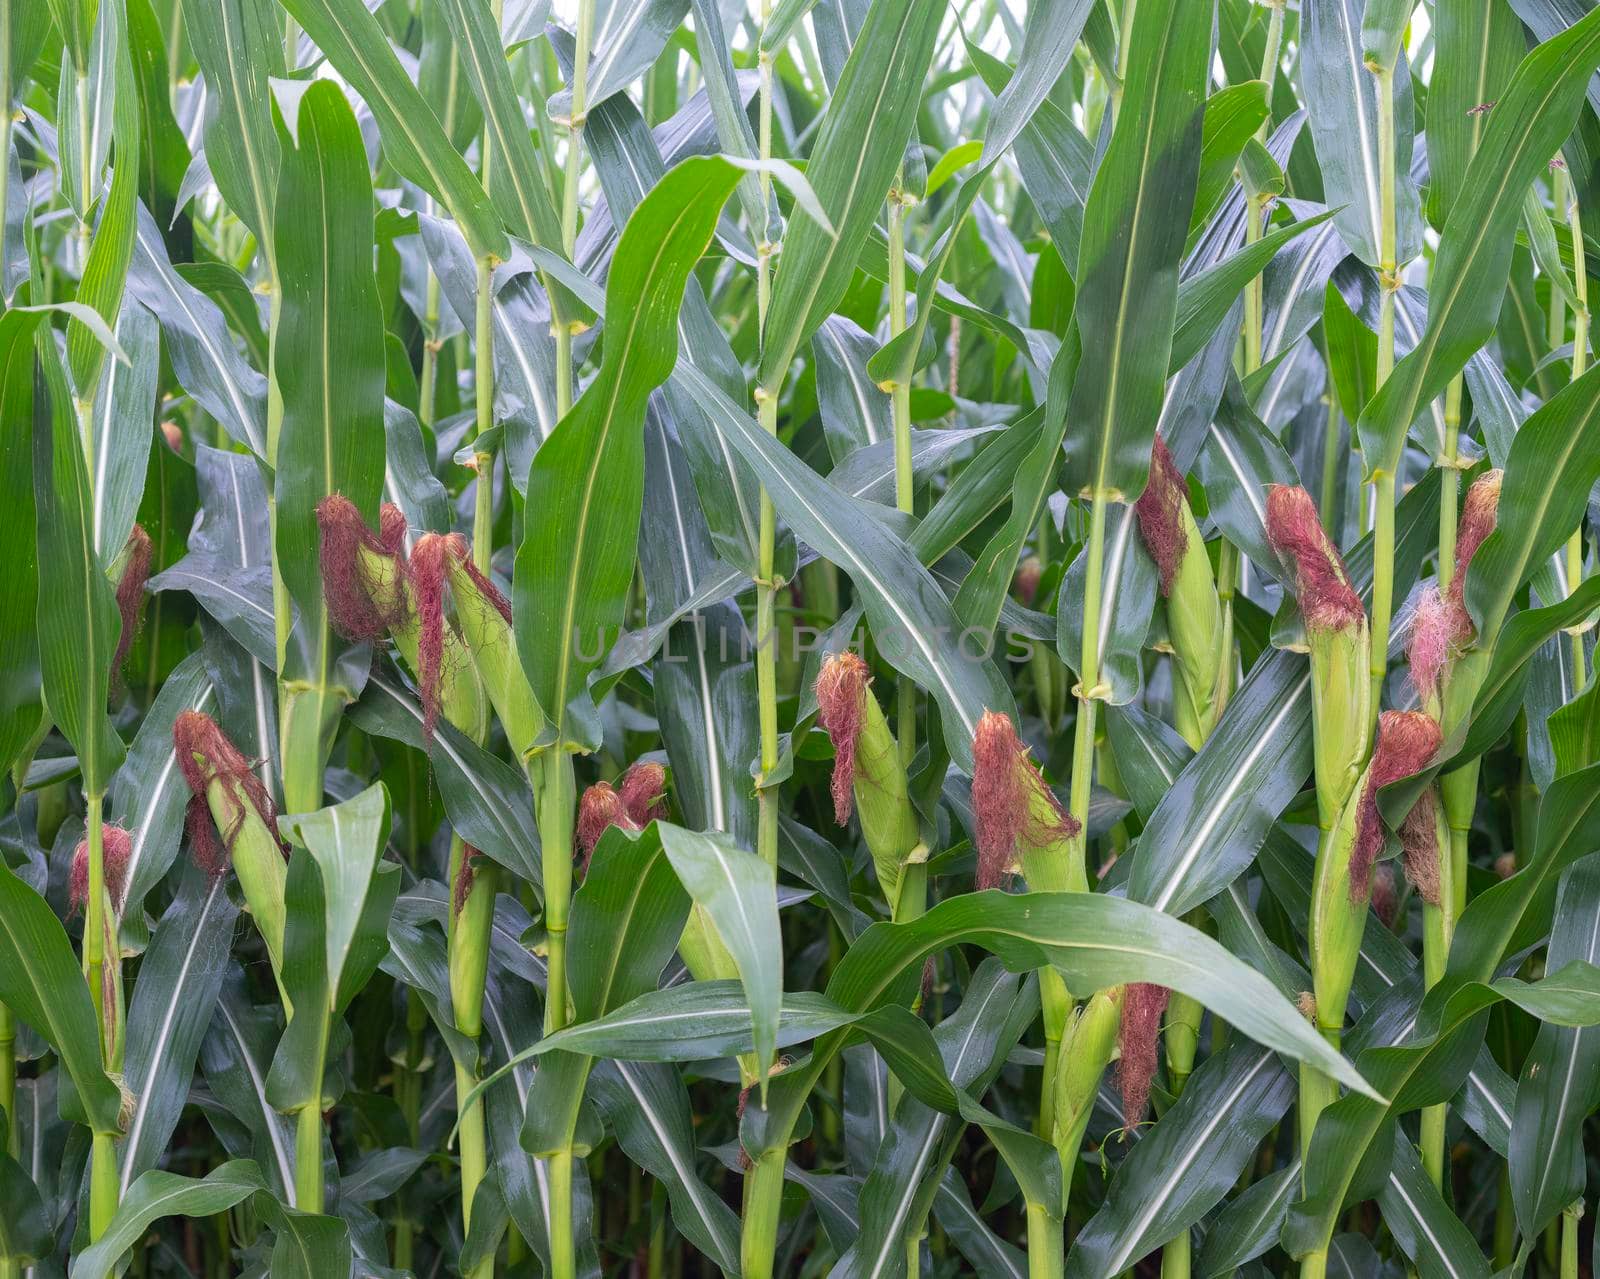 cornfield with cobs almost ready for harvest and red plumes in closeup